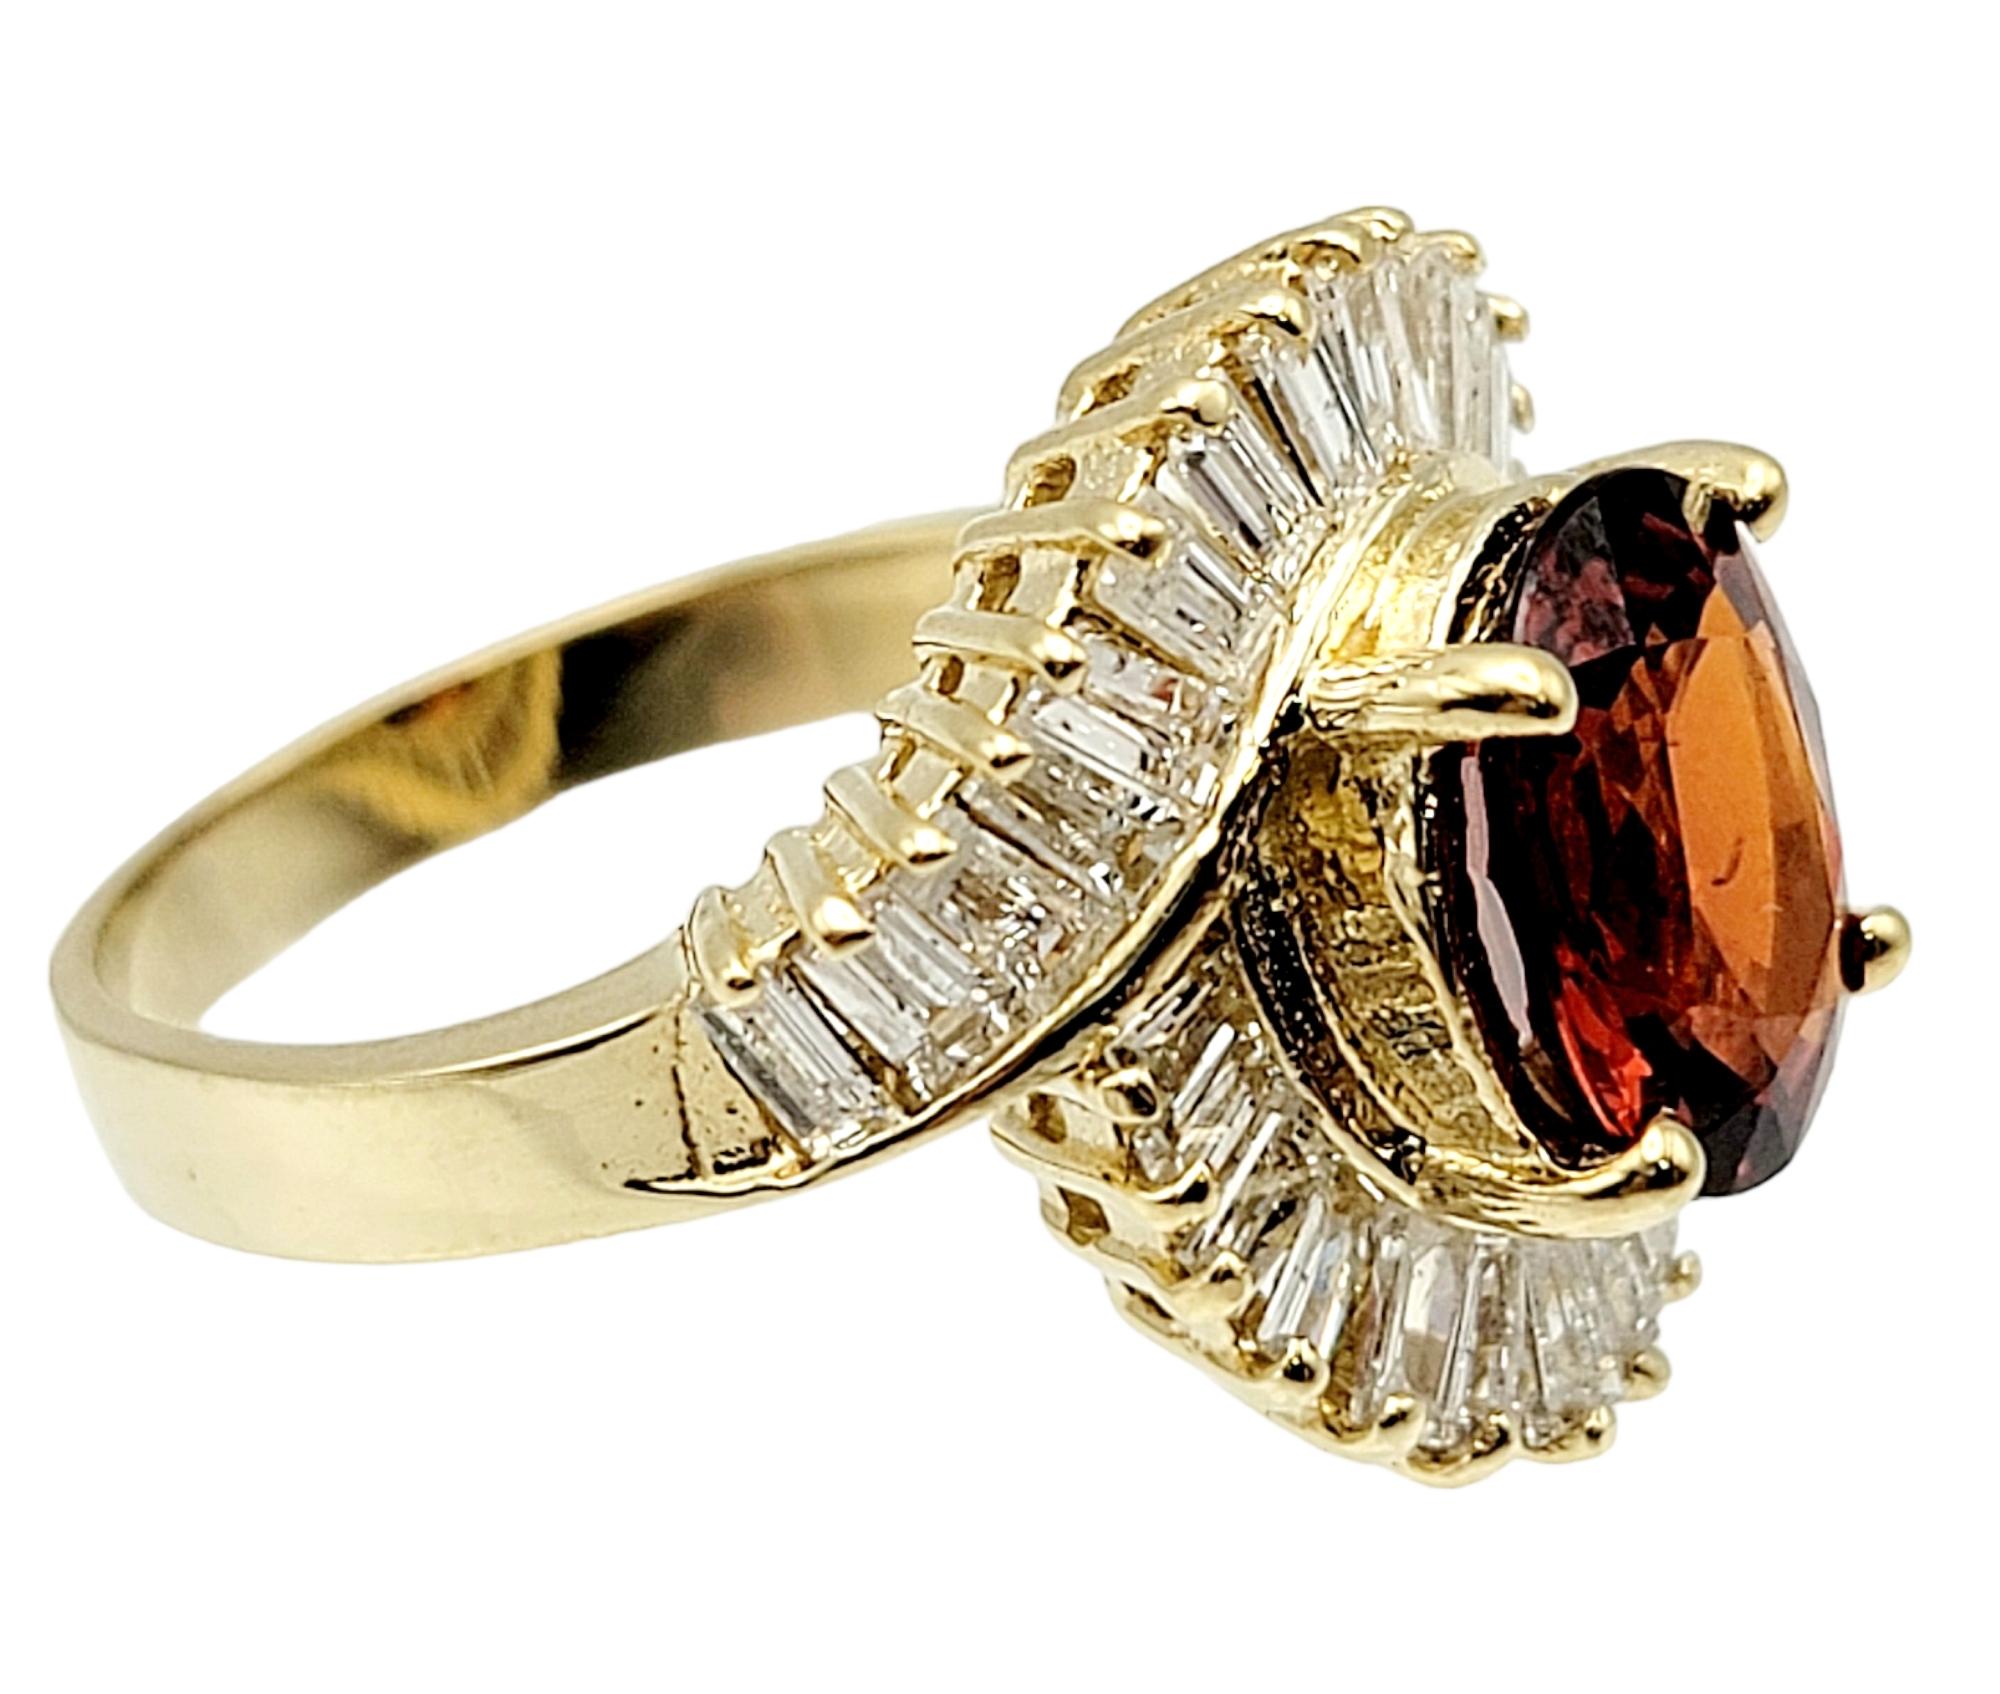 Ring size: 7

This gorgeous garnet cocktail ring fills the finger with incredible sparkle and color. The playful path of diamonds that surround the main stone really catches the light and creates a brilliant shine, capturing the viewers eye and